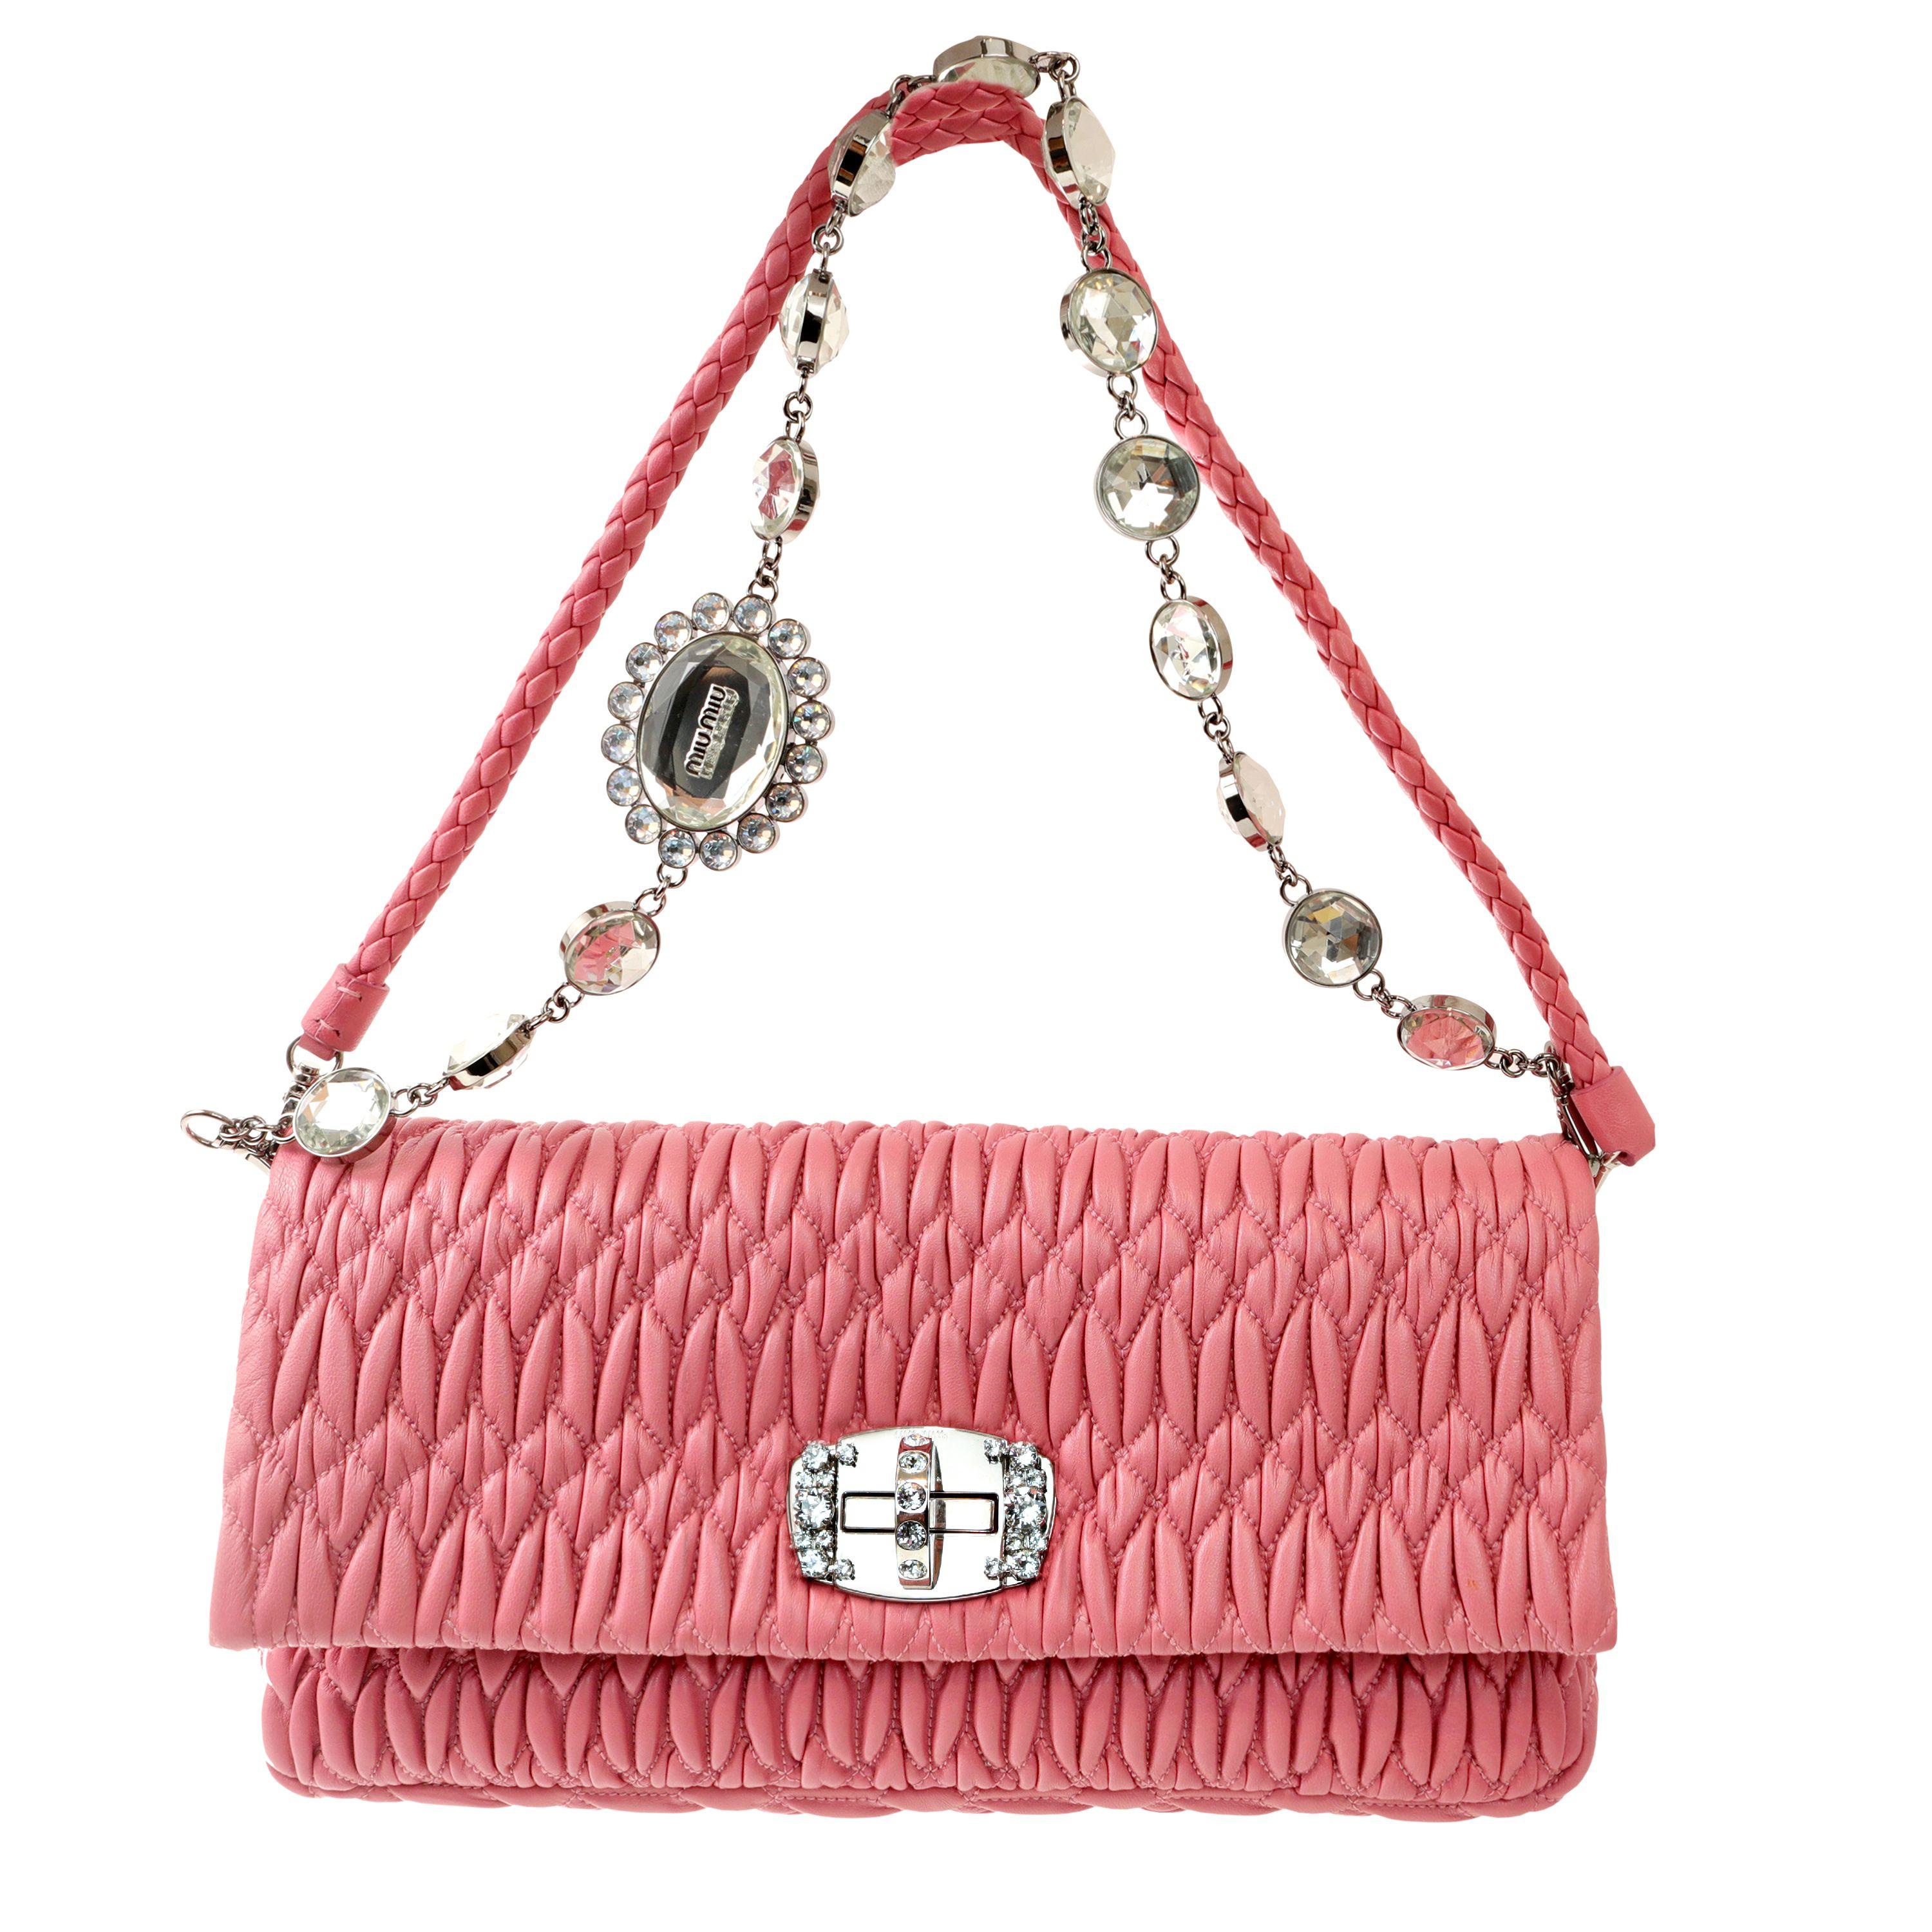 Women's Miu Miu Rose Pink Iconic Crystal Cloquè Small Bag with Silver Hardware For Sale